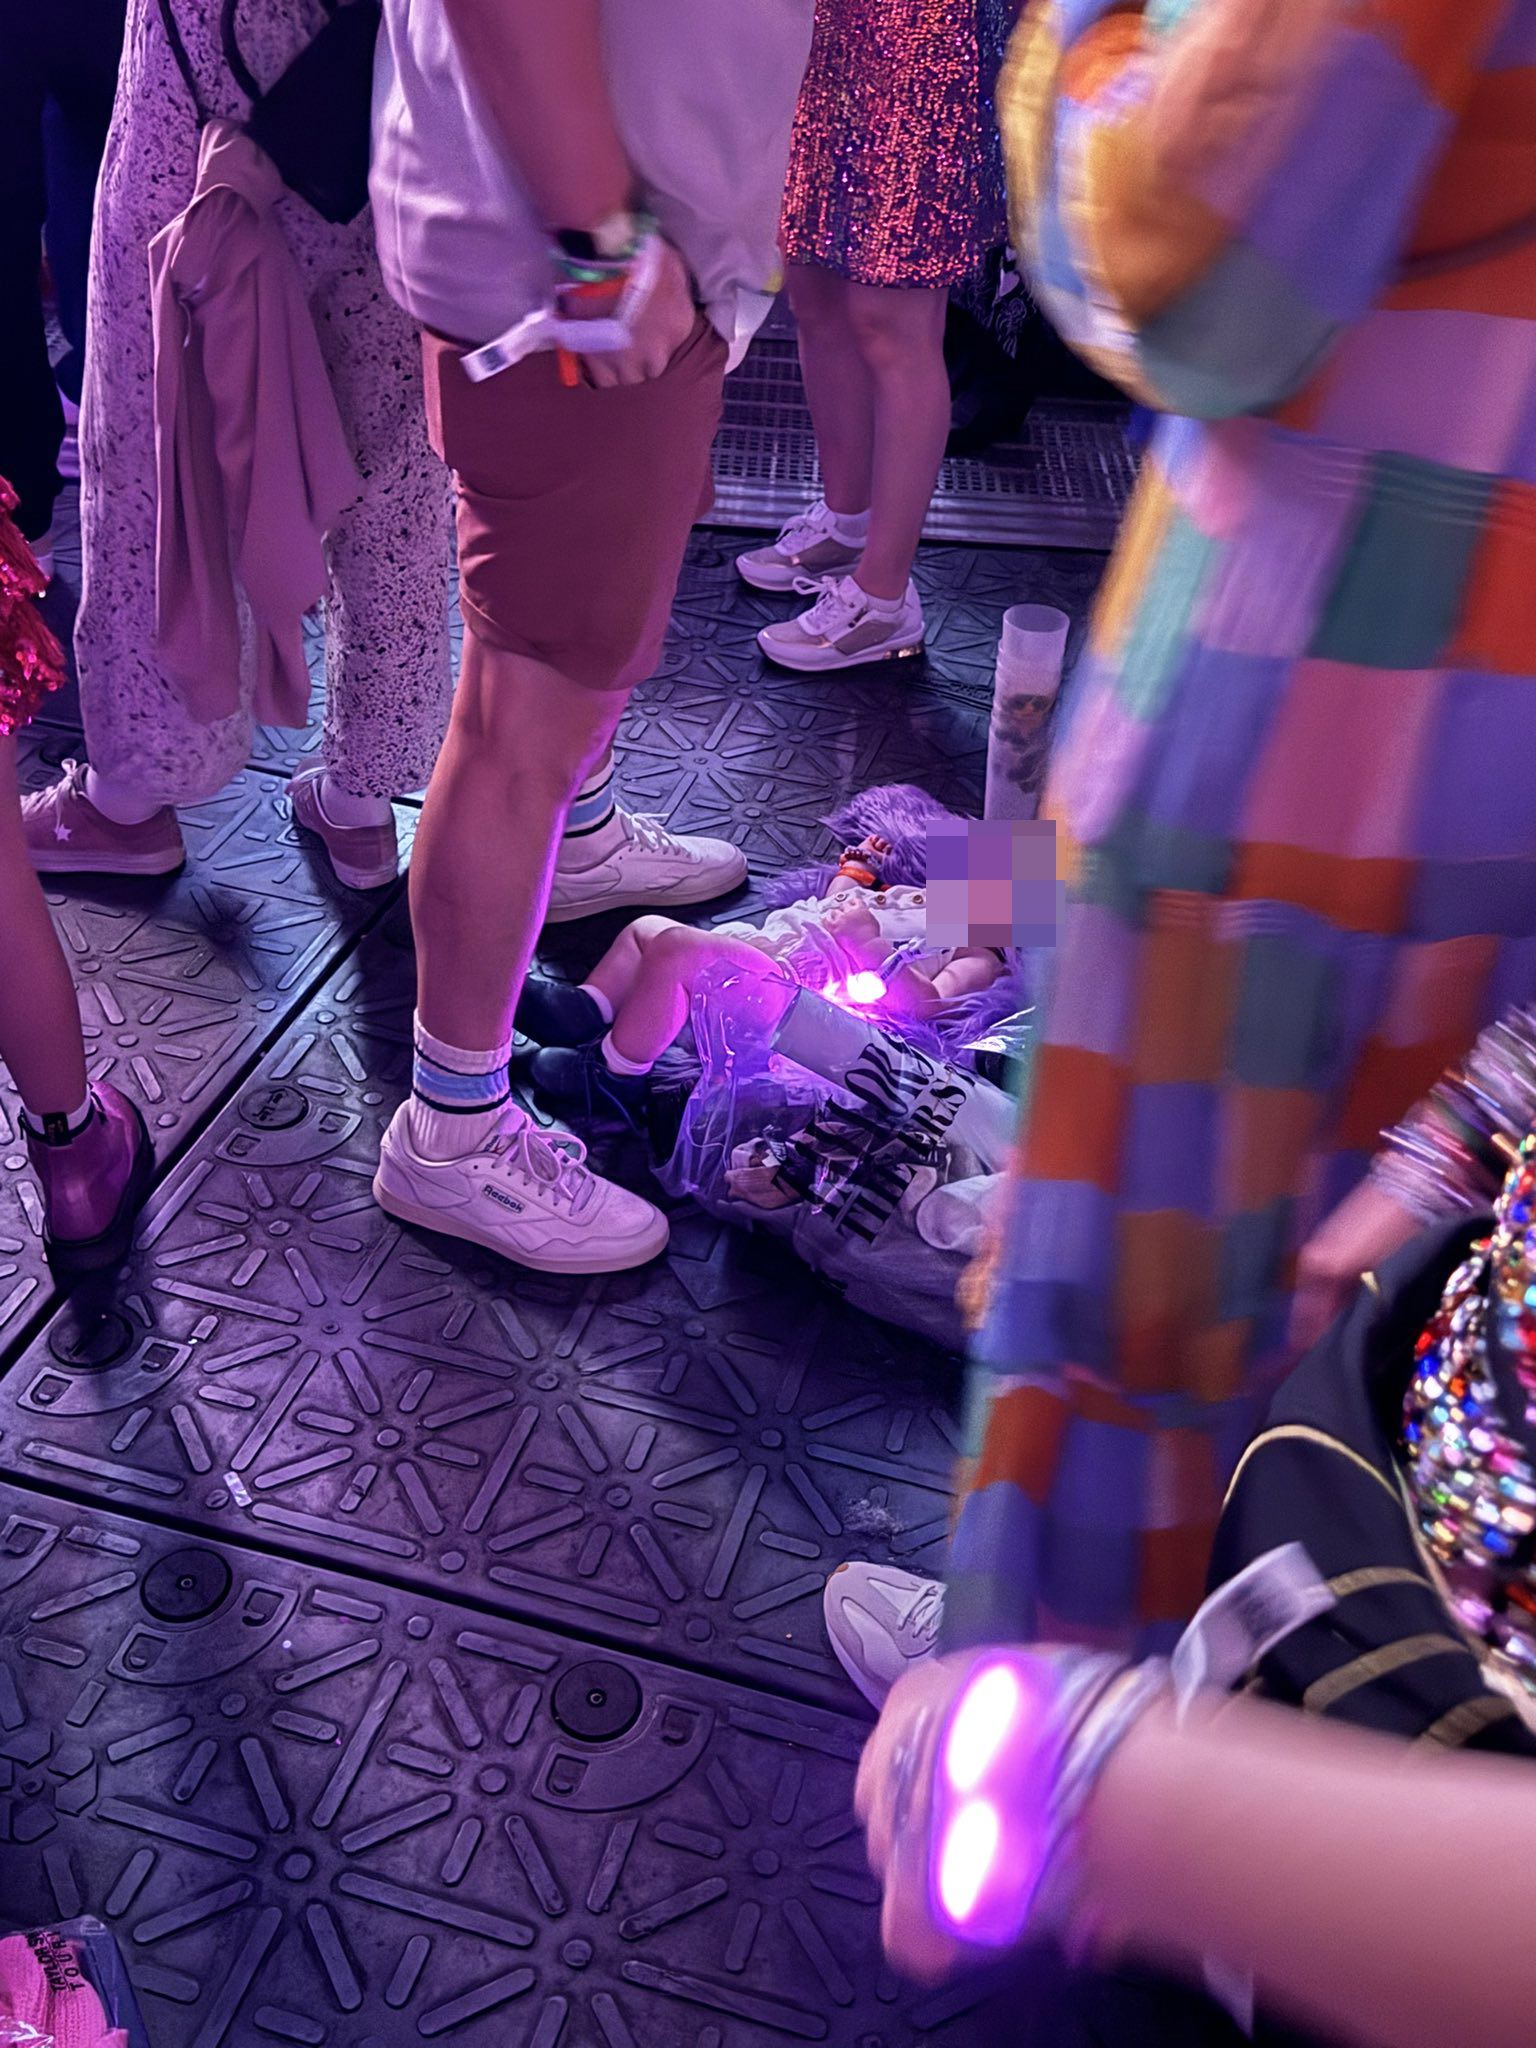 A baby on the floor of a Taylor Swift concert